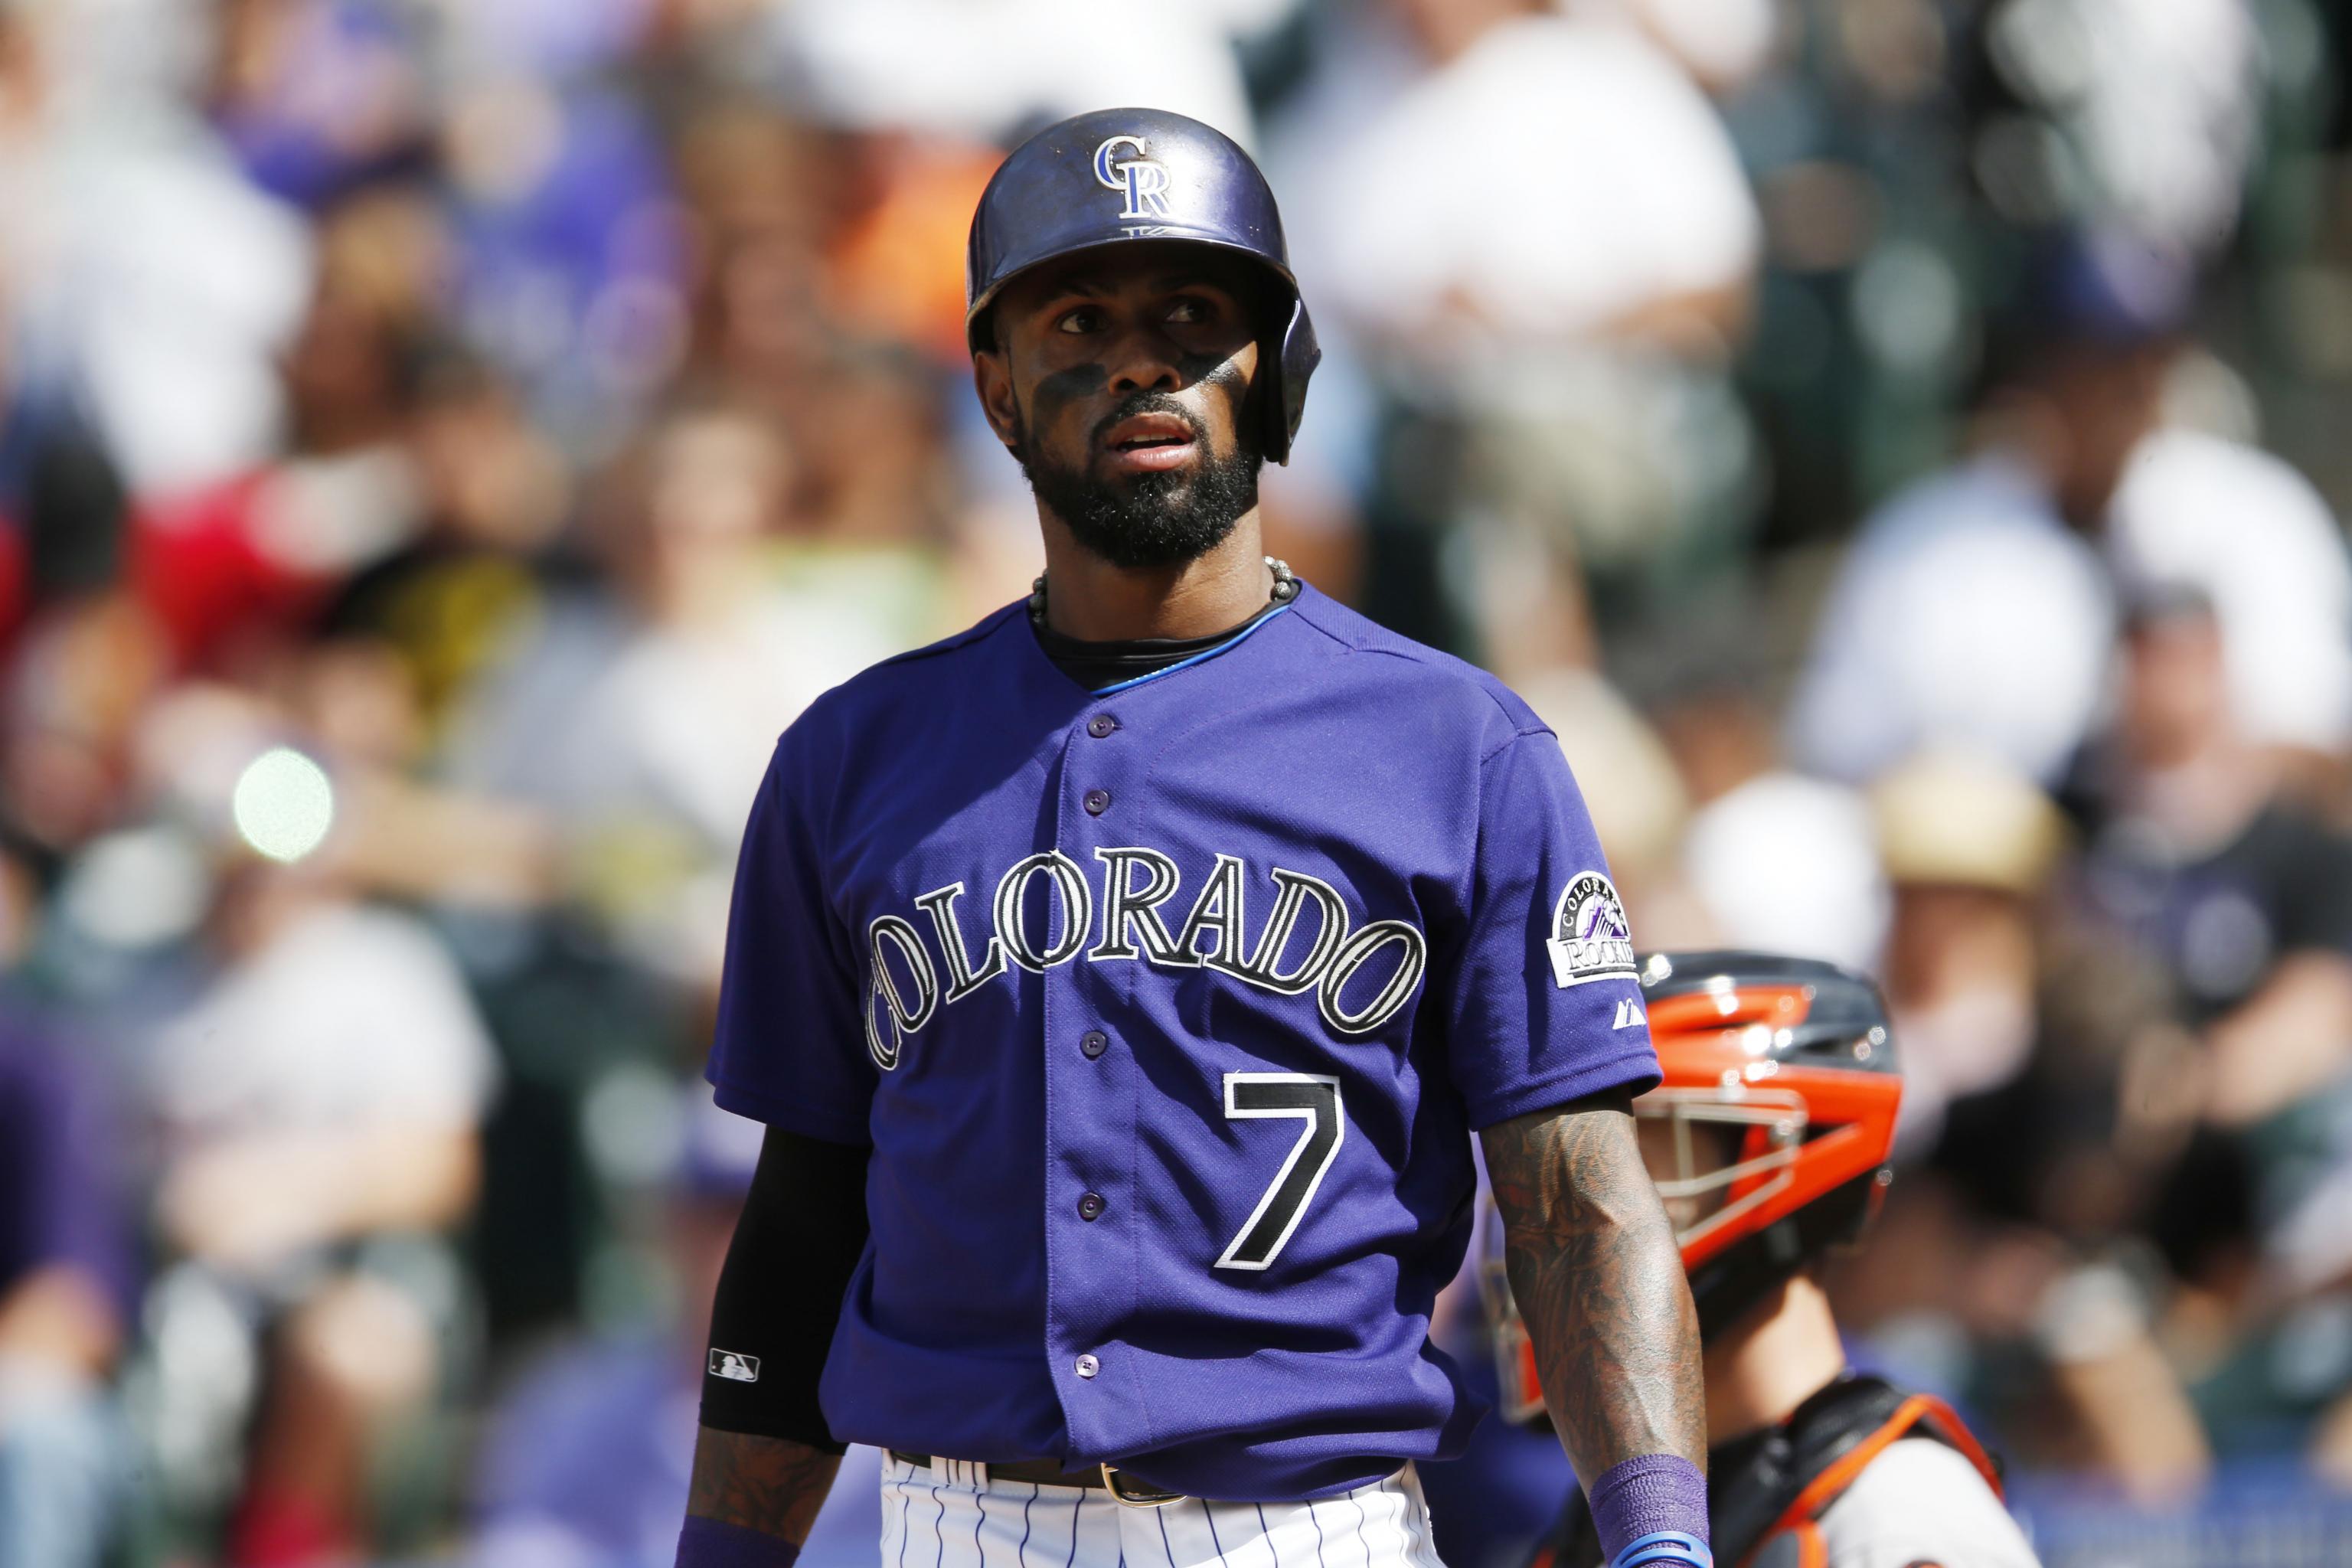 Jaded Jose Reyes would welcome a trade from the Rockies – The Denver Post